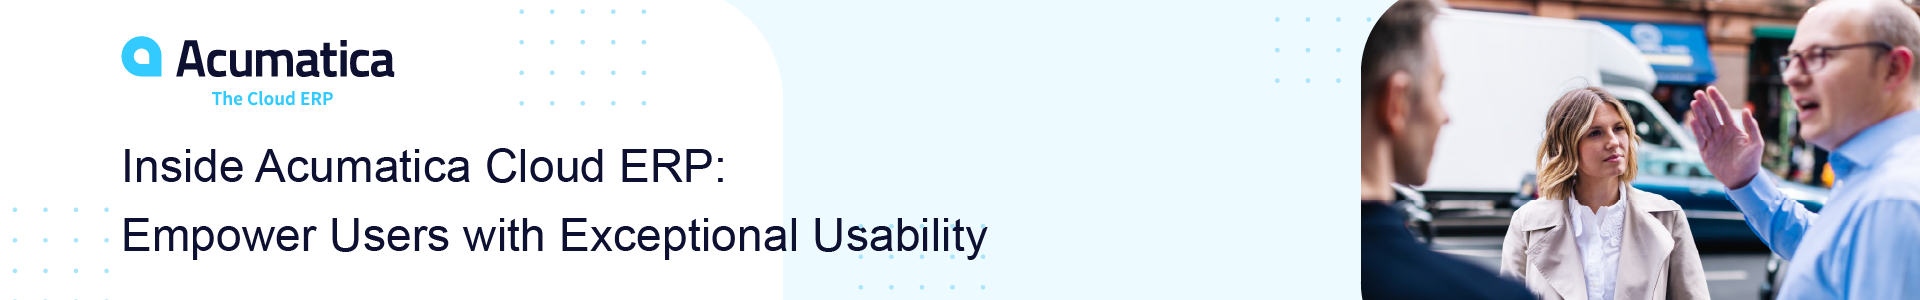 empower_users_with_exceptional_usability__lp_header.png